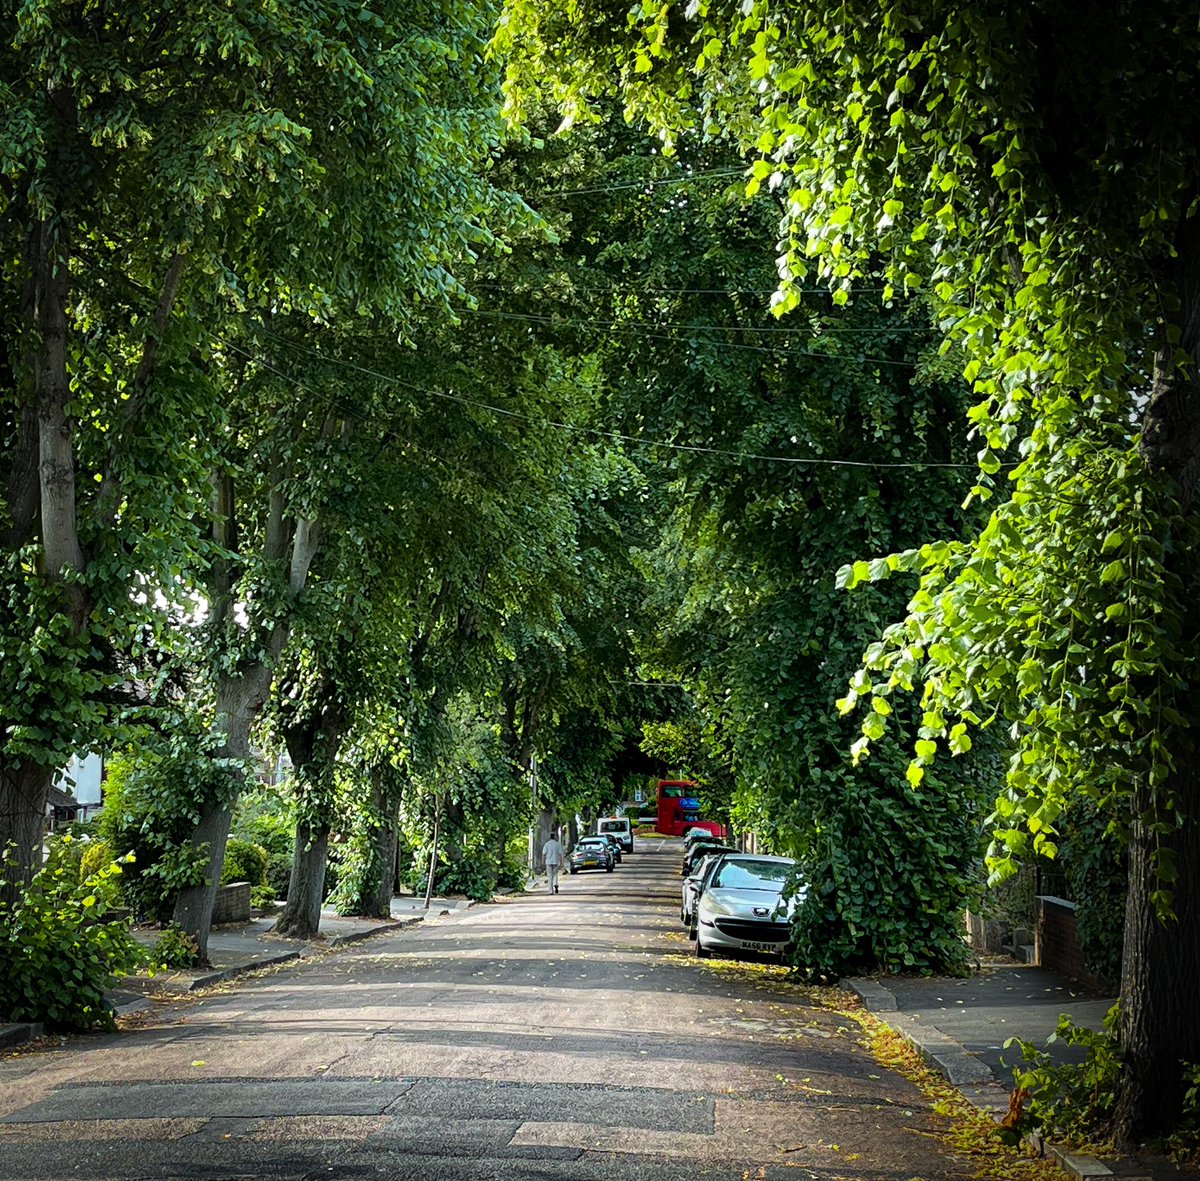 Street forest-bathing 🧘🌳 A recent study found - 'that when people can see trees, there is an increase in their mental wellbeing, and this lasts at least eight hours.' We say, bring these benefits into the world outside our front doors 🏡@treesforstreets 🌳🌳